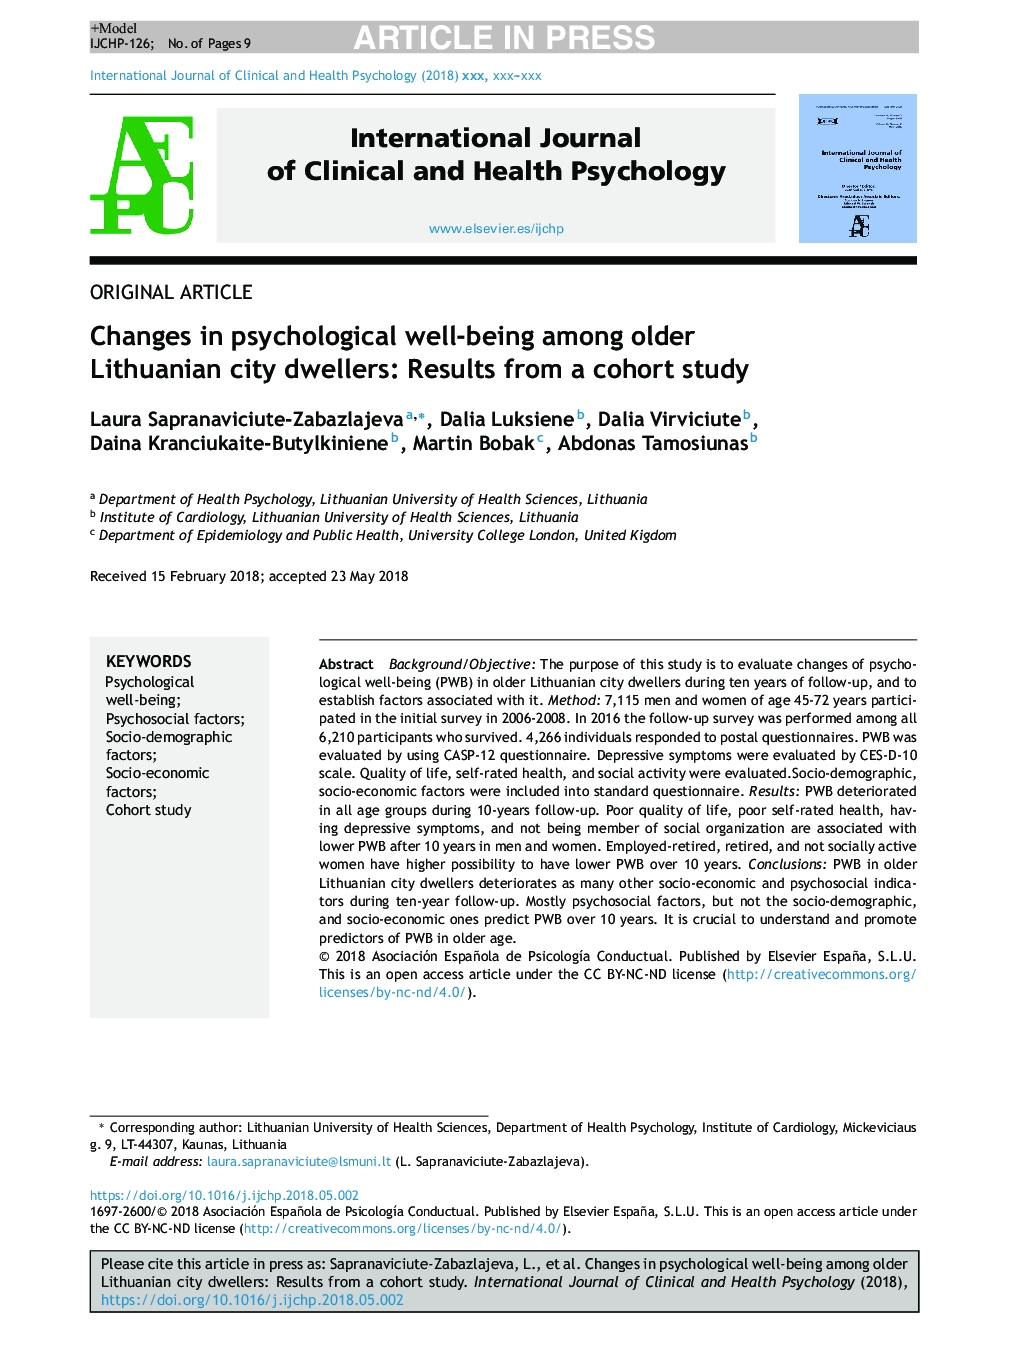 Changes in psychological well-being among older Lithuanian city dwellers: Results from a cohort study